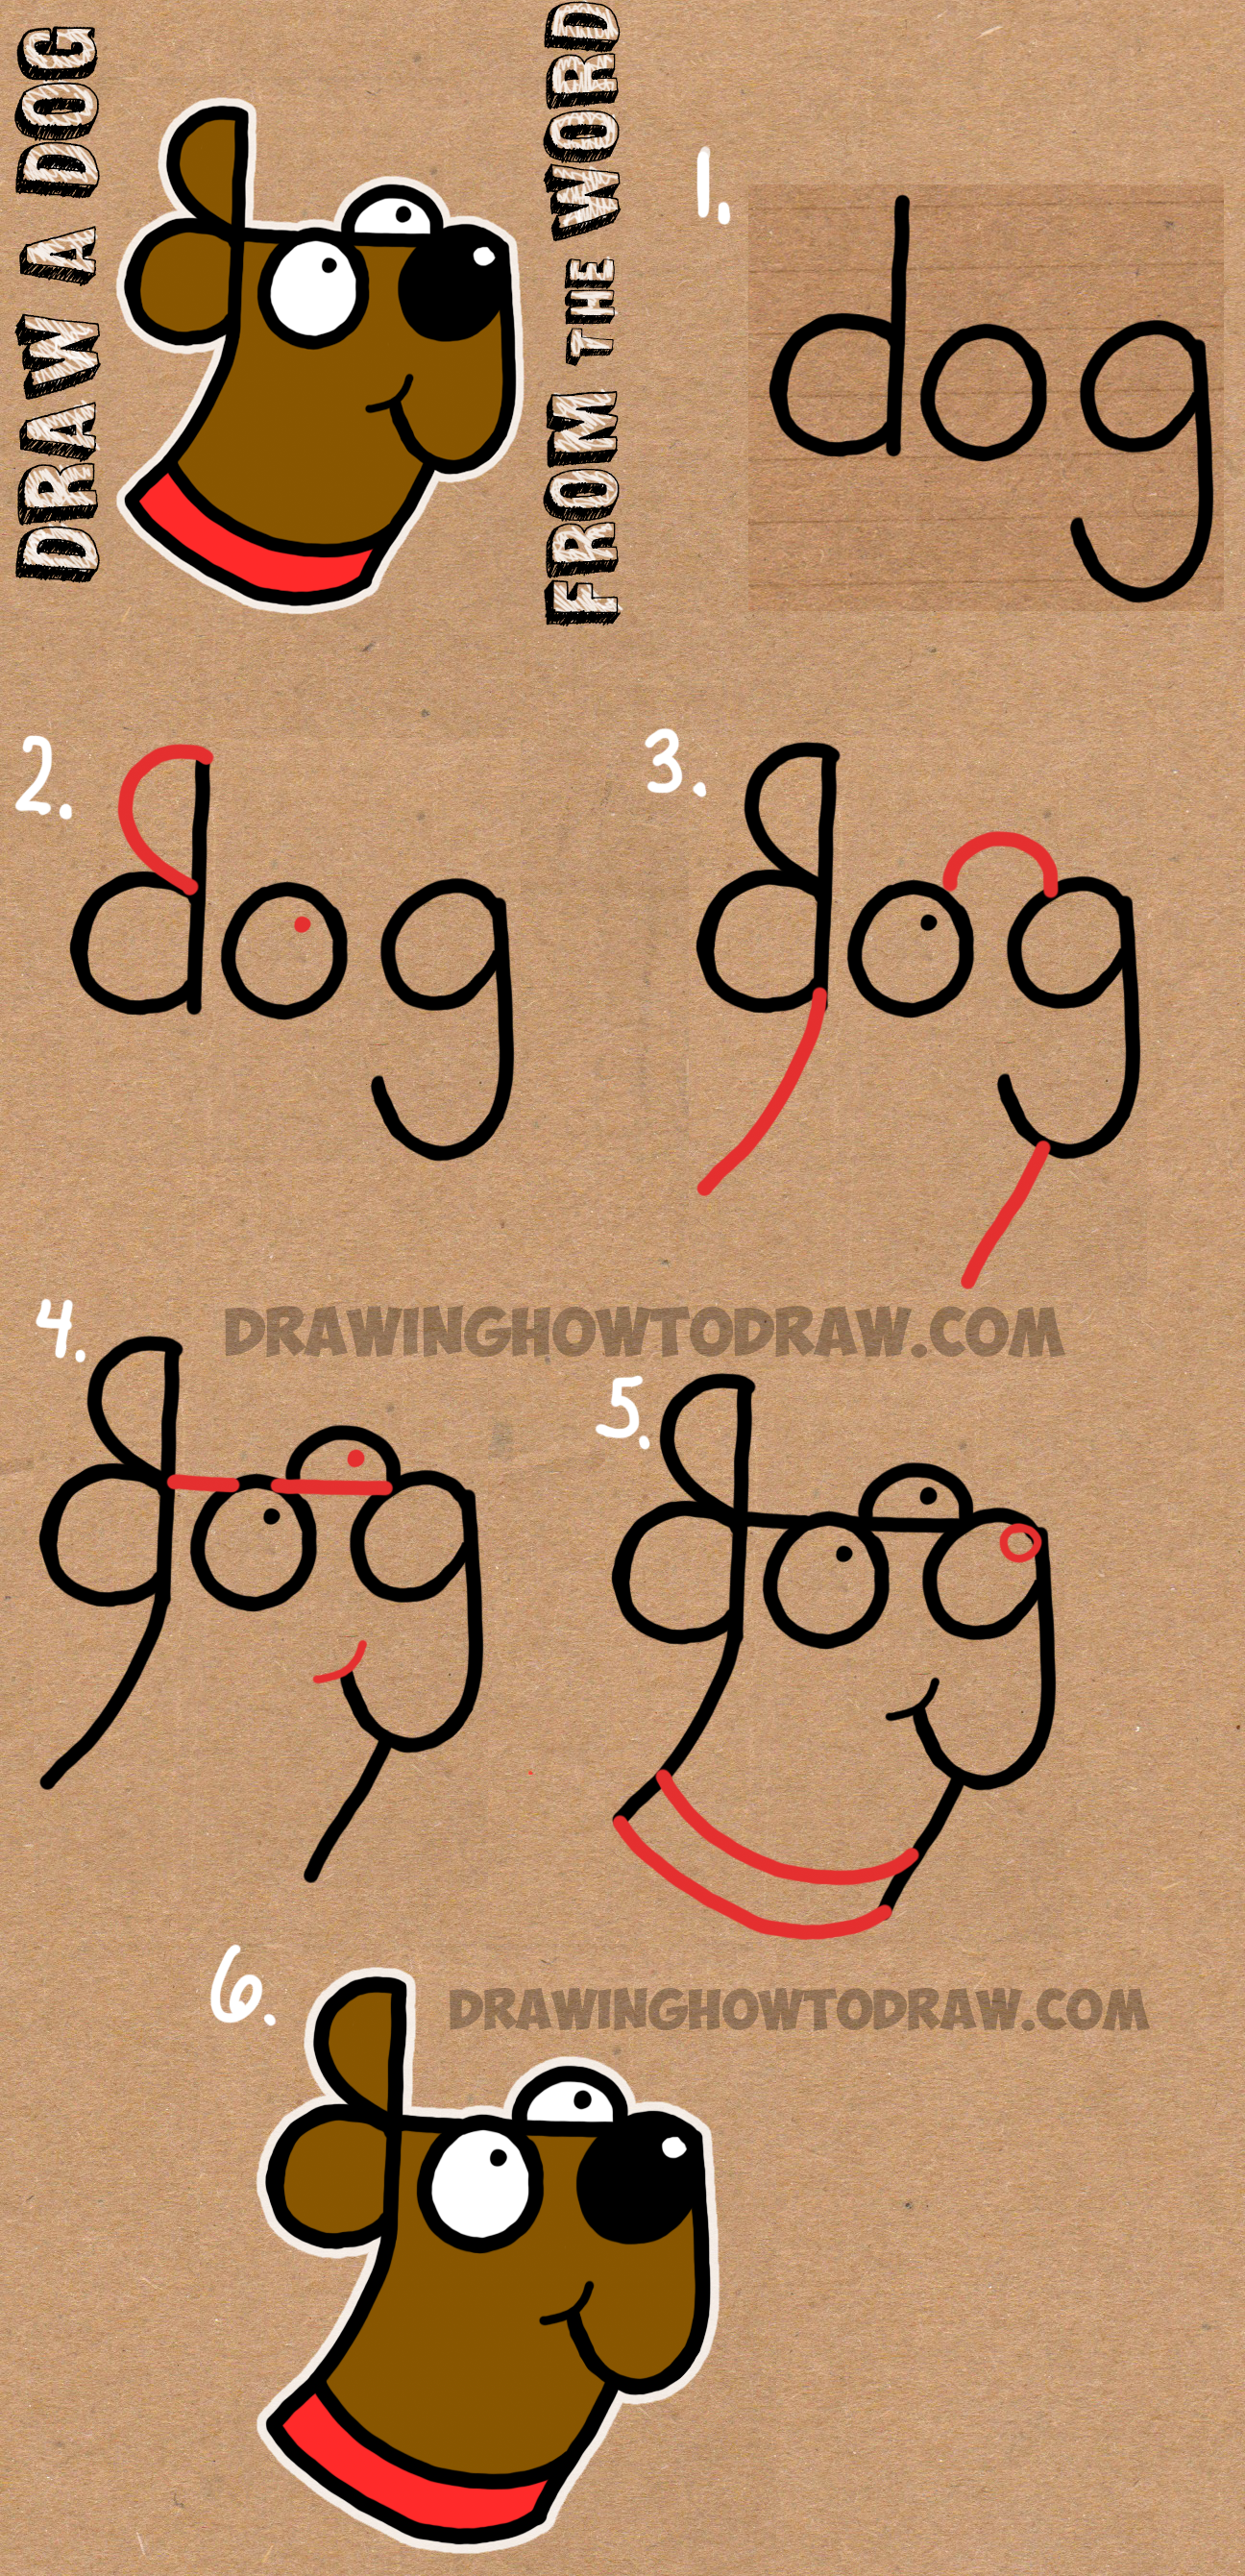 How To Draw A Dog Easy Step By Step For Beginners Design Talk